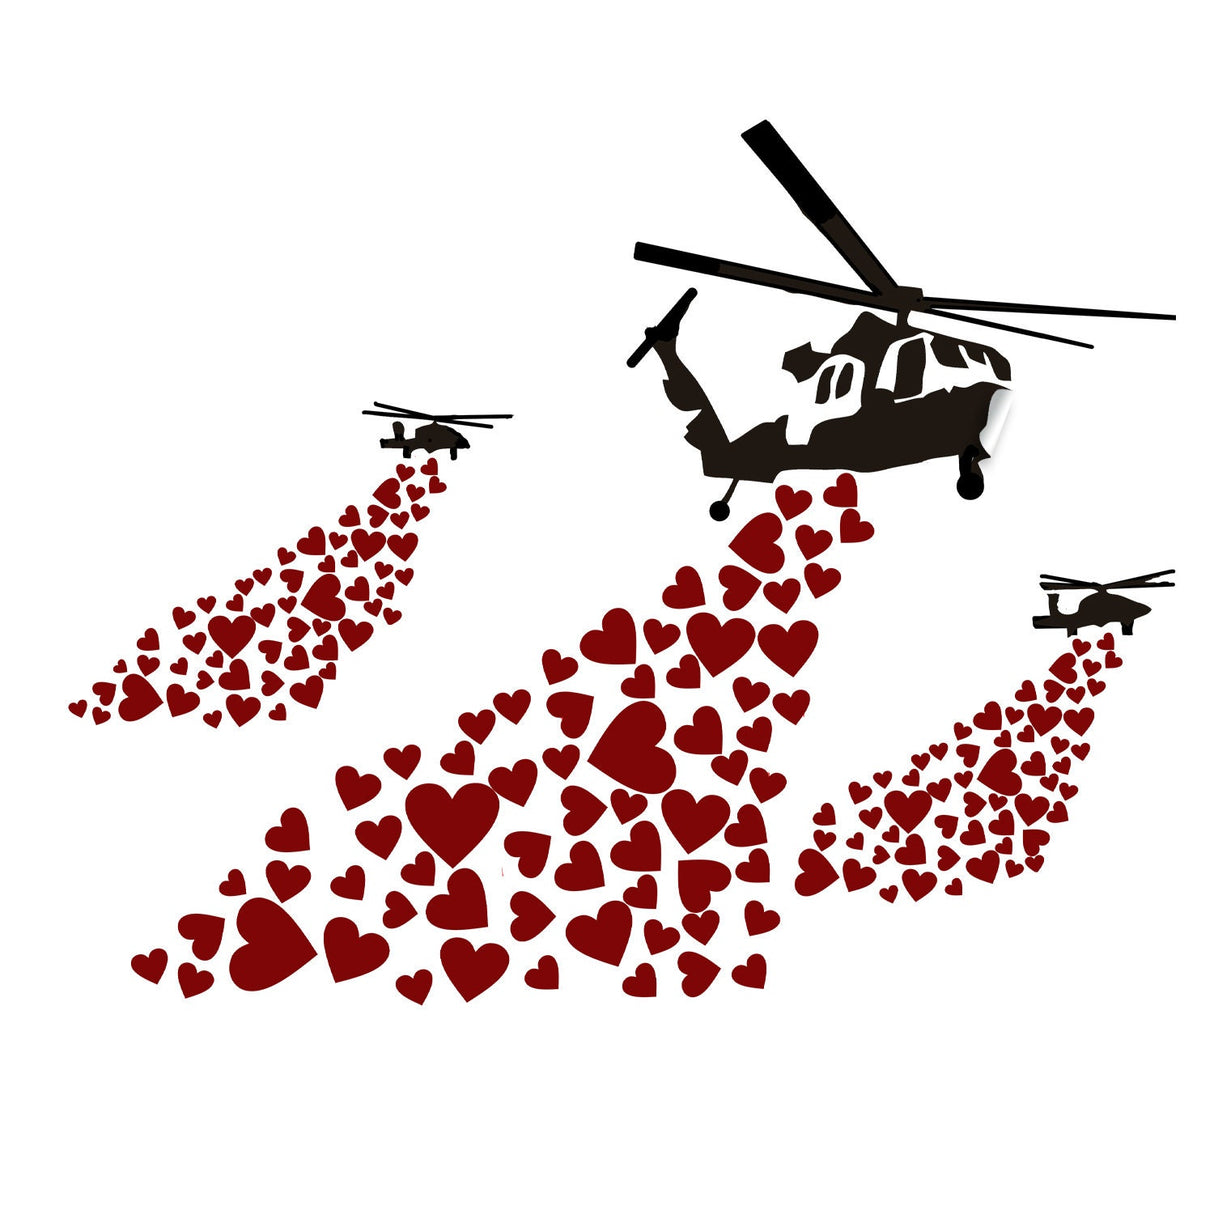 Banksy Vinyl Wall Decal Helicopter with Hearts - Street Art Graffiti Helicopters Decor Sticker